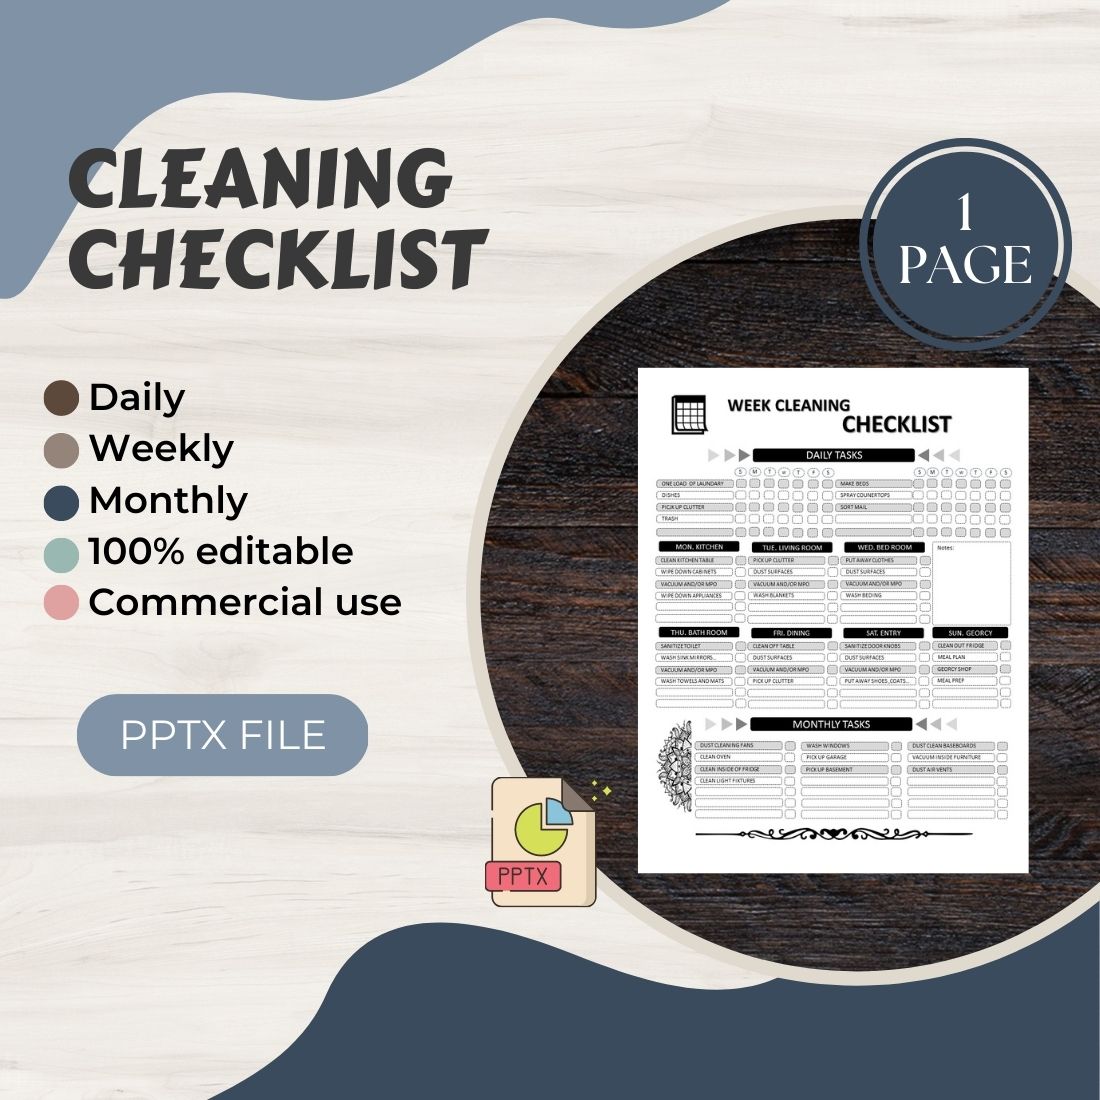 Cleaning checklist schedule log book totally editable for commercial use preview image.